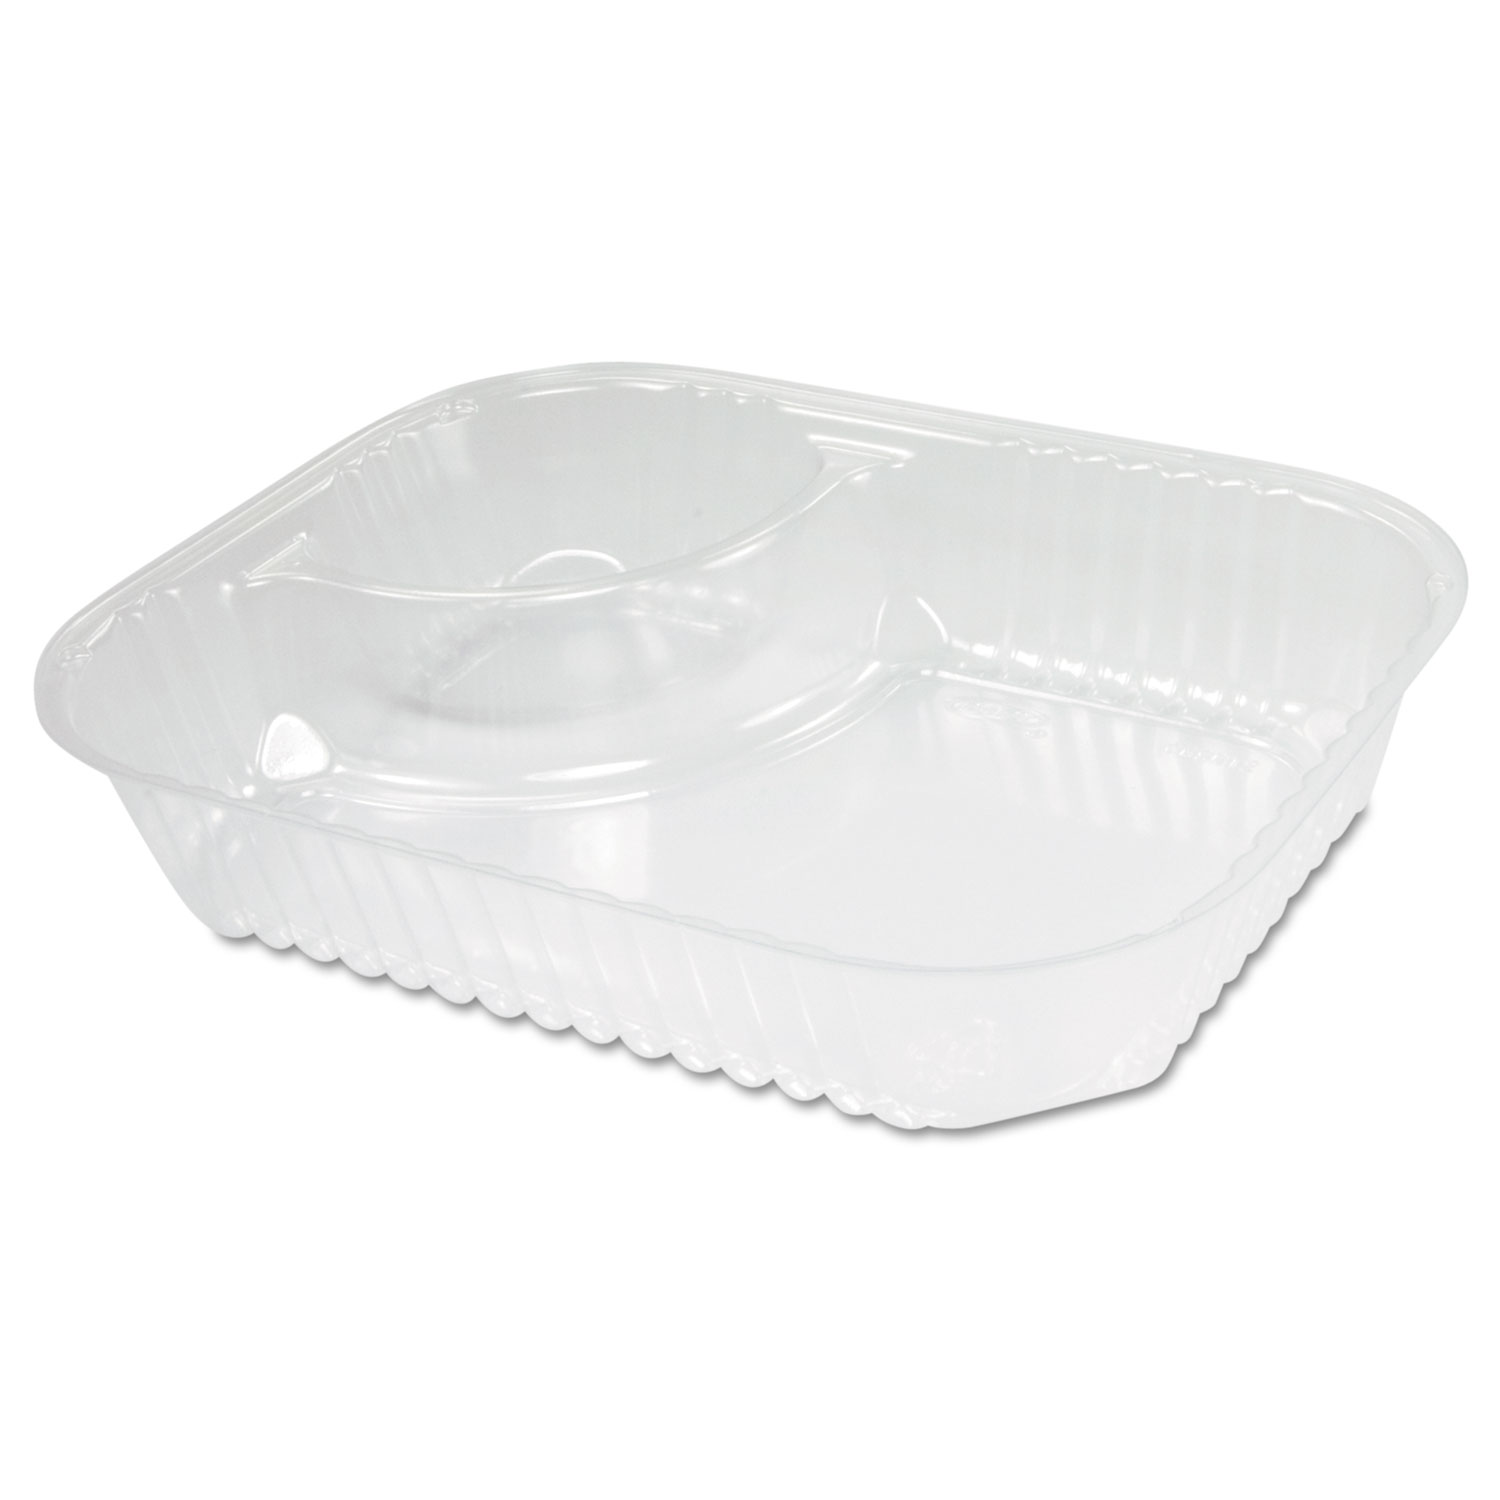  Dart C68NT2 ClearPac Large Nacho Tray, 2-Compartments, Clear, 500/Ctn (DCCC68NT2) 